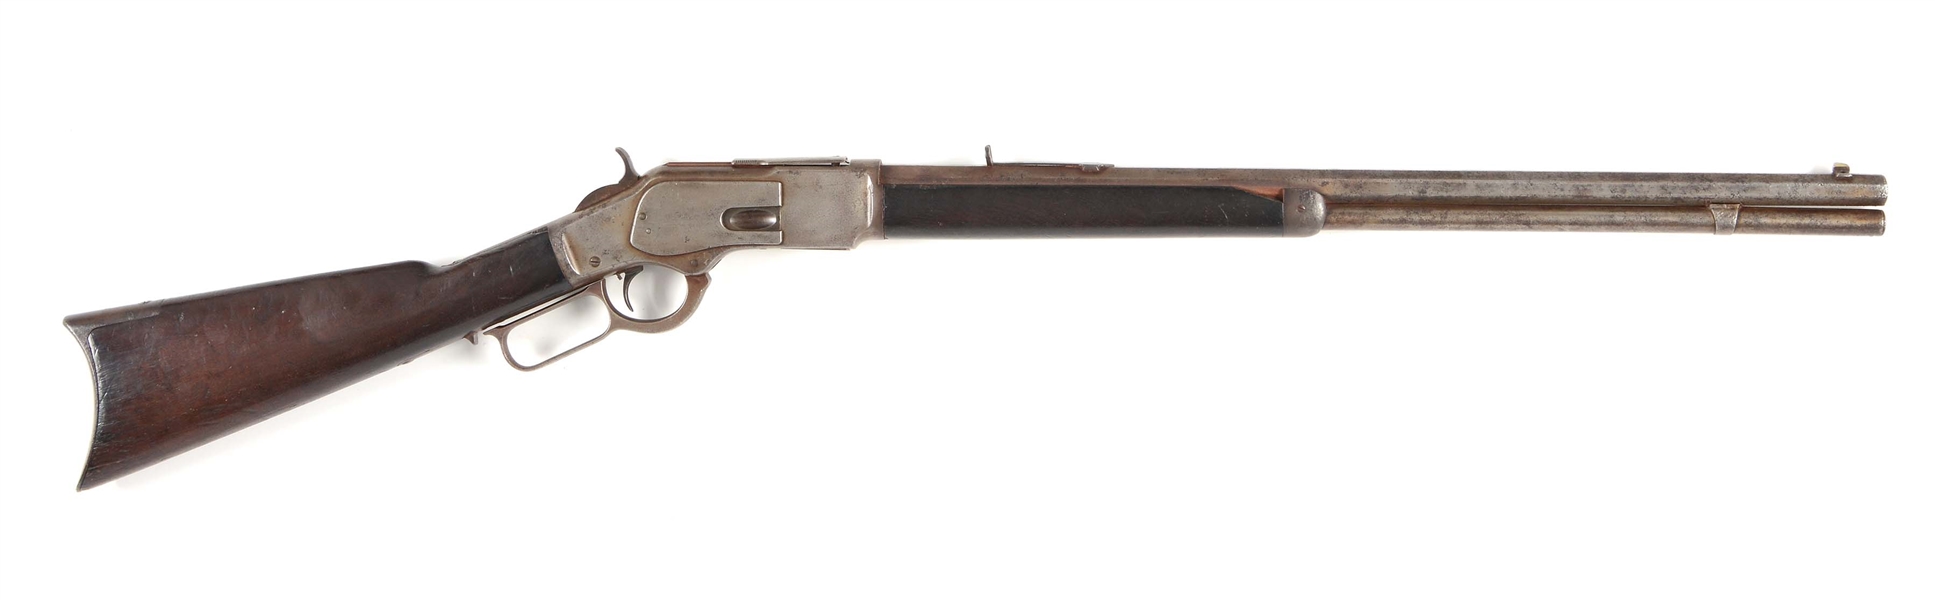 (A) WINCHESTER MODEL 1873 .38 CALIBER LEVER ACTION RIFLE (1886).